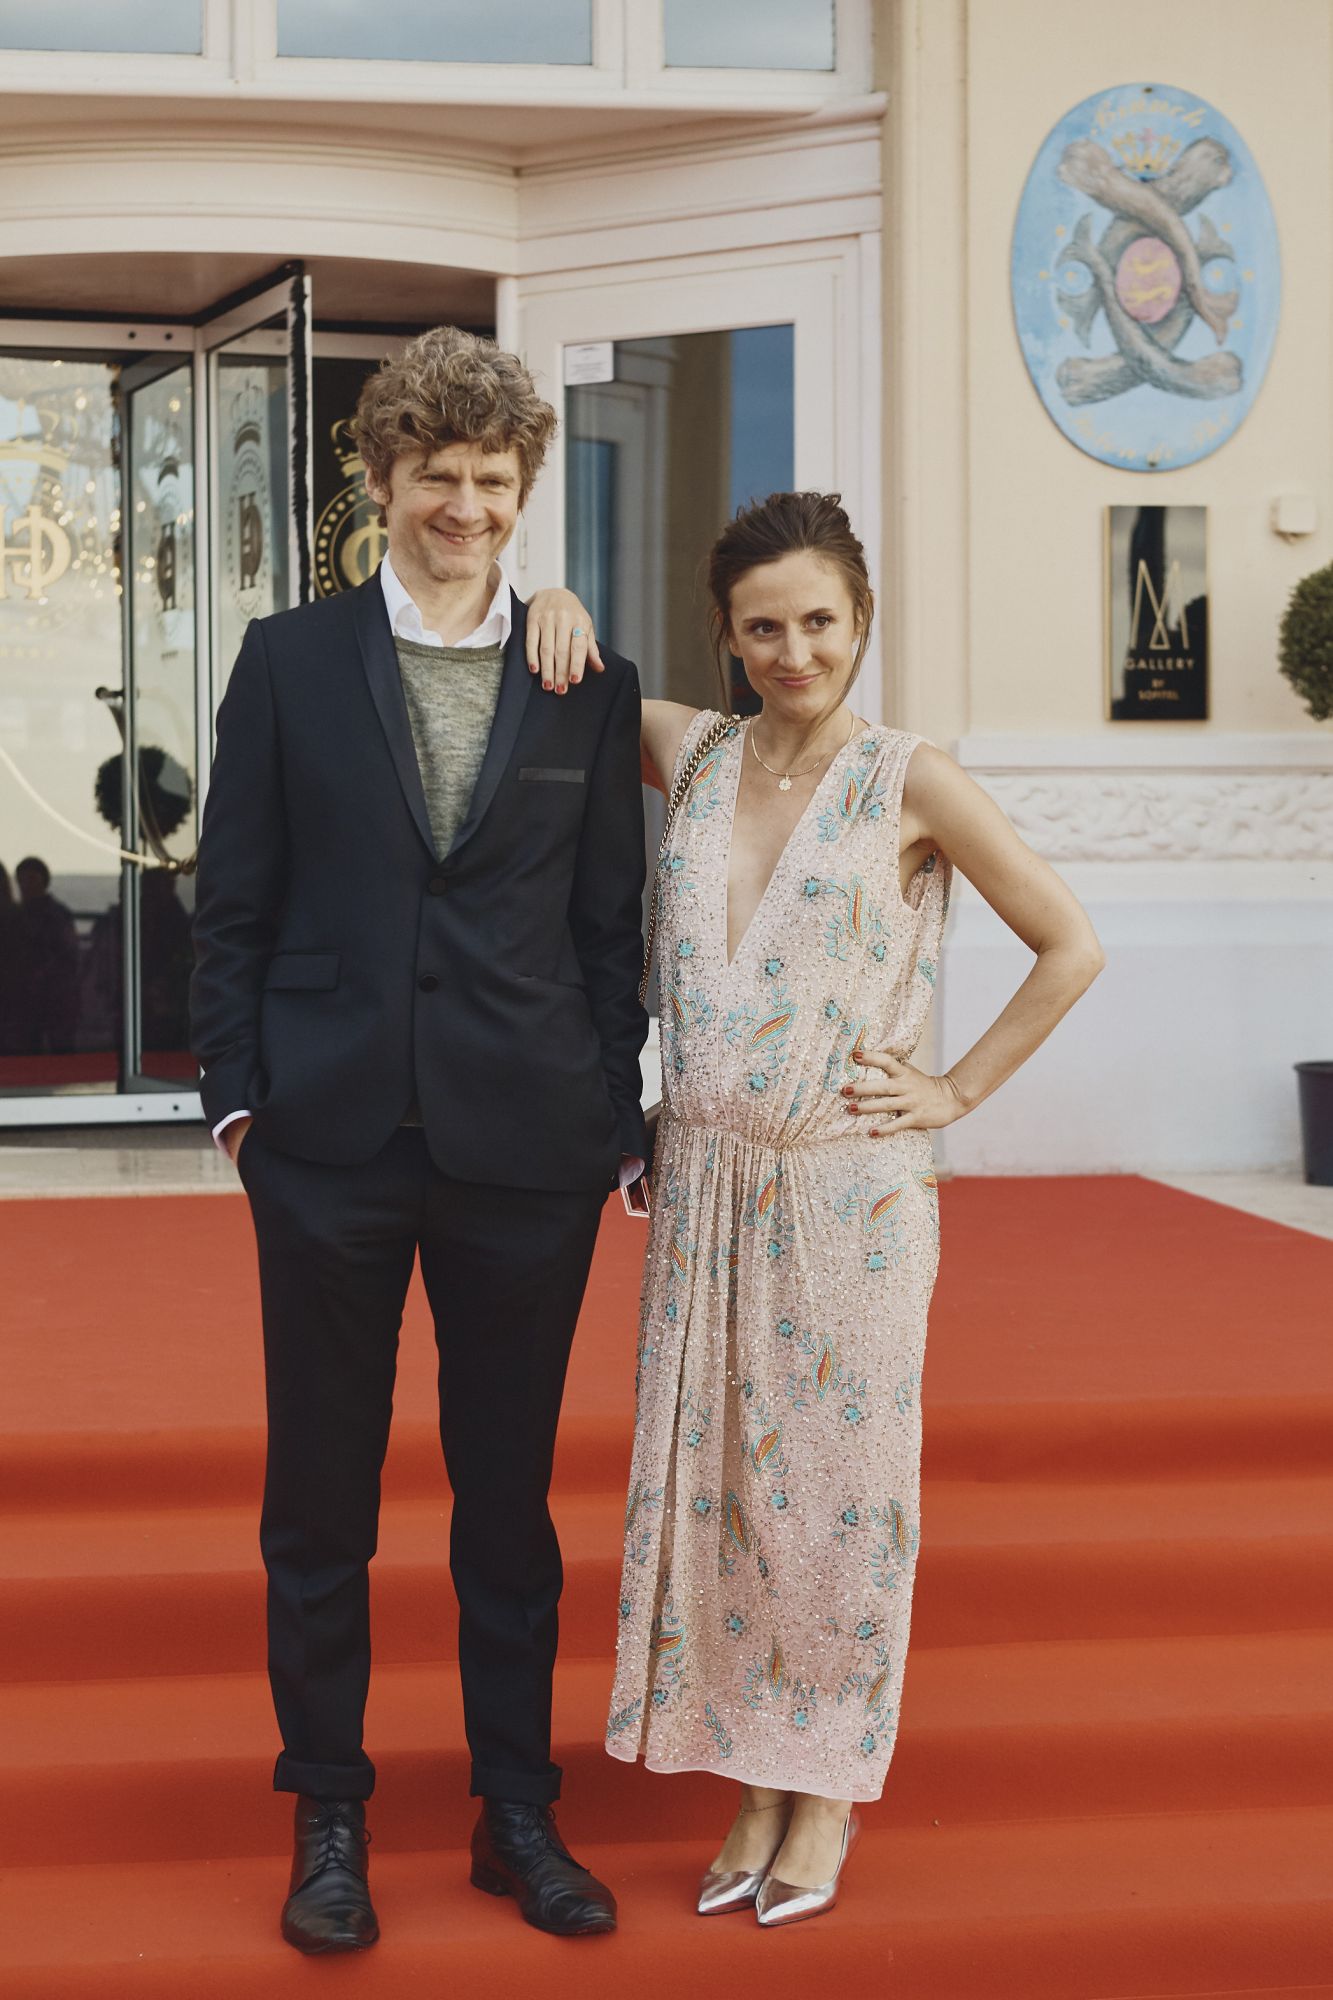 Nicolas Vaude et Camille Chamoux *Antik Batik  
Le Grand Hotel Cabourg - MGallery by Sofitel*
*Maquillage Dr Hauschka Coiffure Franck Provost*